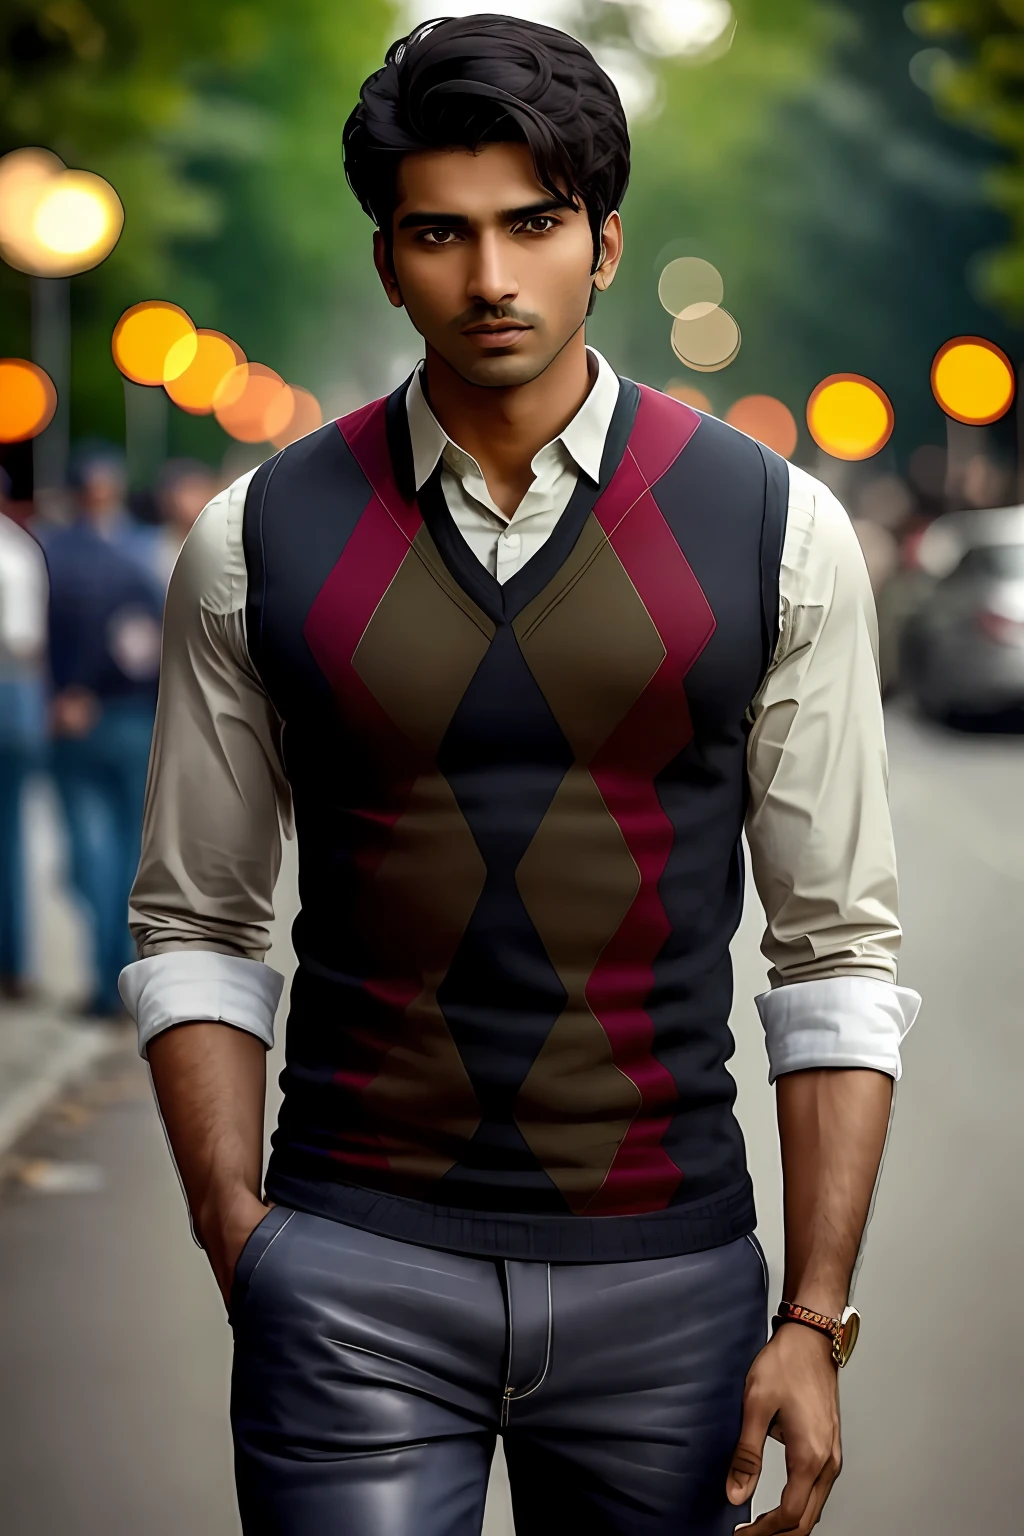 photo of an Indian man, wearing a red argyle vest, green collared shirt, and black jeans,  bokeh, outdoor background, masterpiece, high quality, photorealistic, fashion